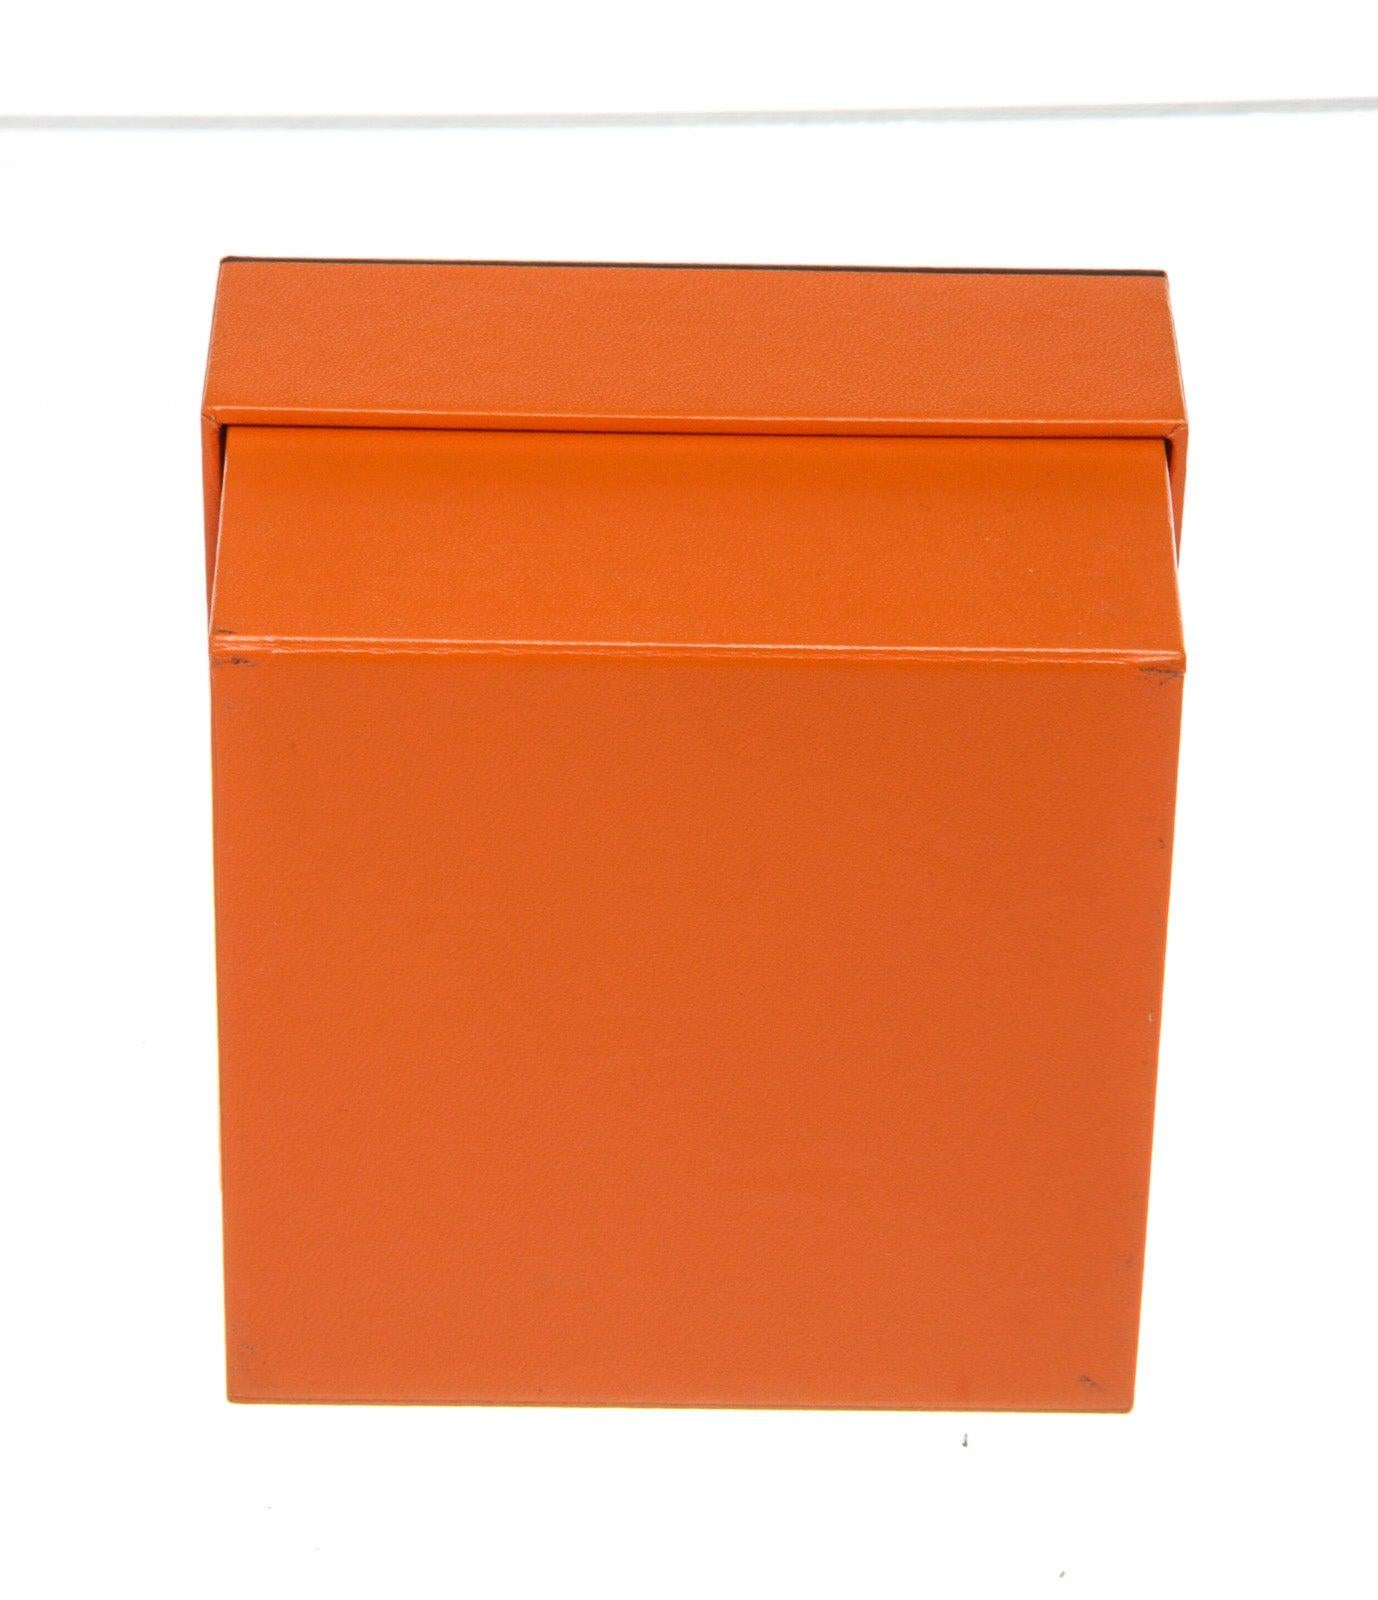 Hermes Orange Watch Box In Good Condition For Sale In Irvine, CA